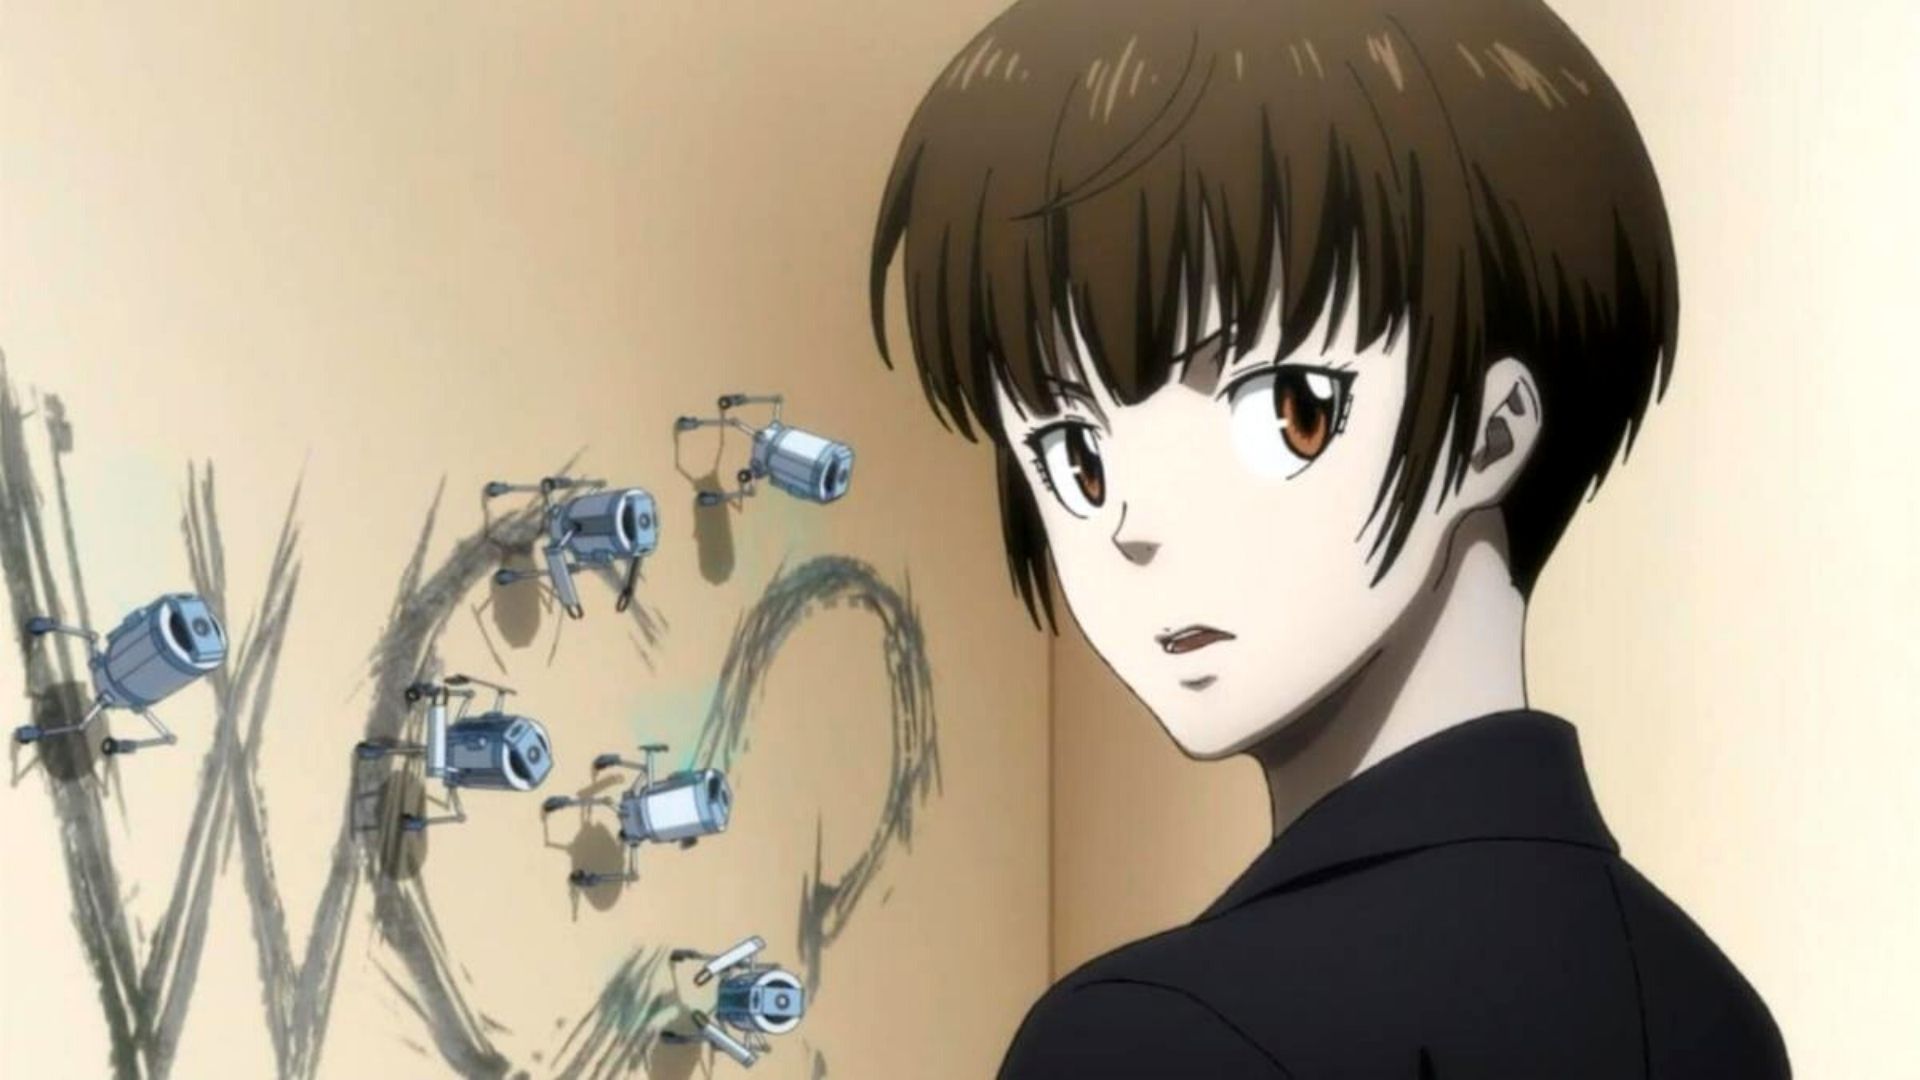 Psycho pass 02 nyaatorrents its the chemicals inspired flight download torrent